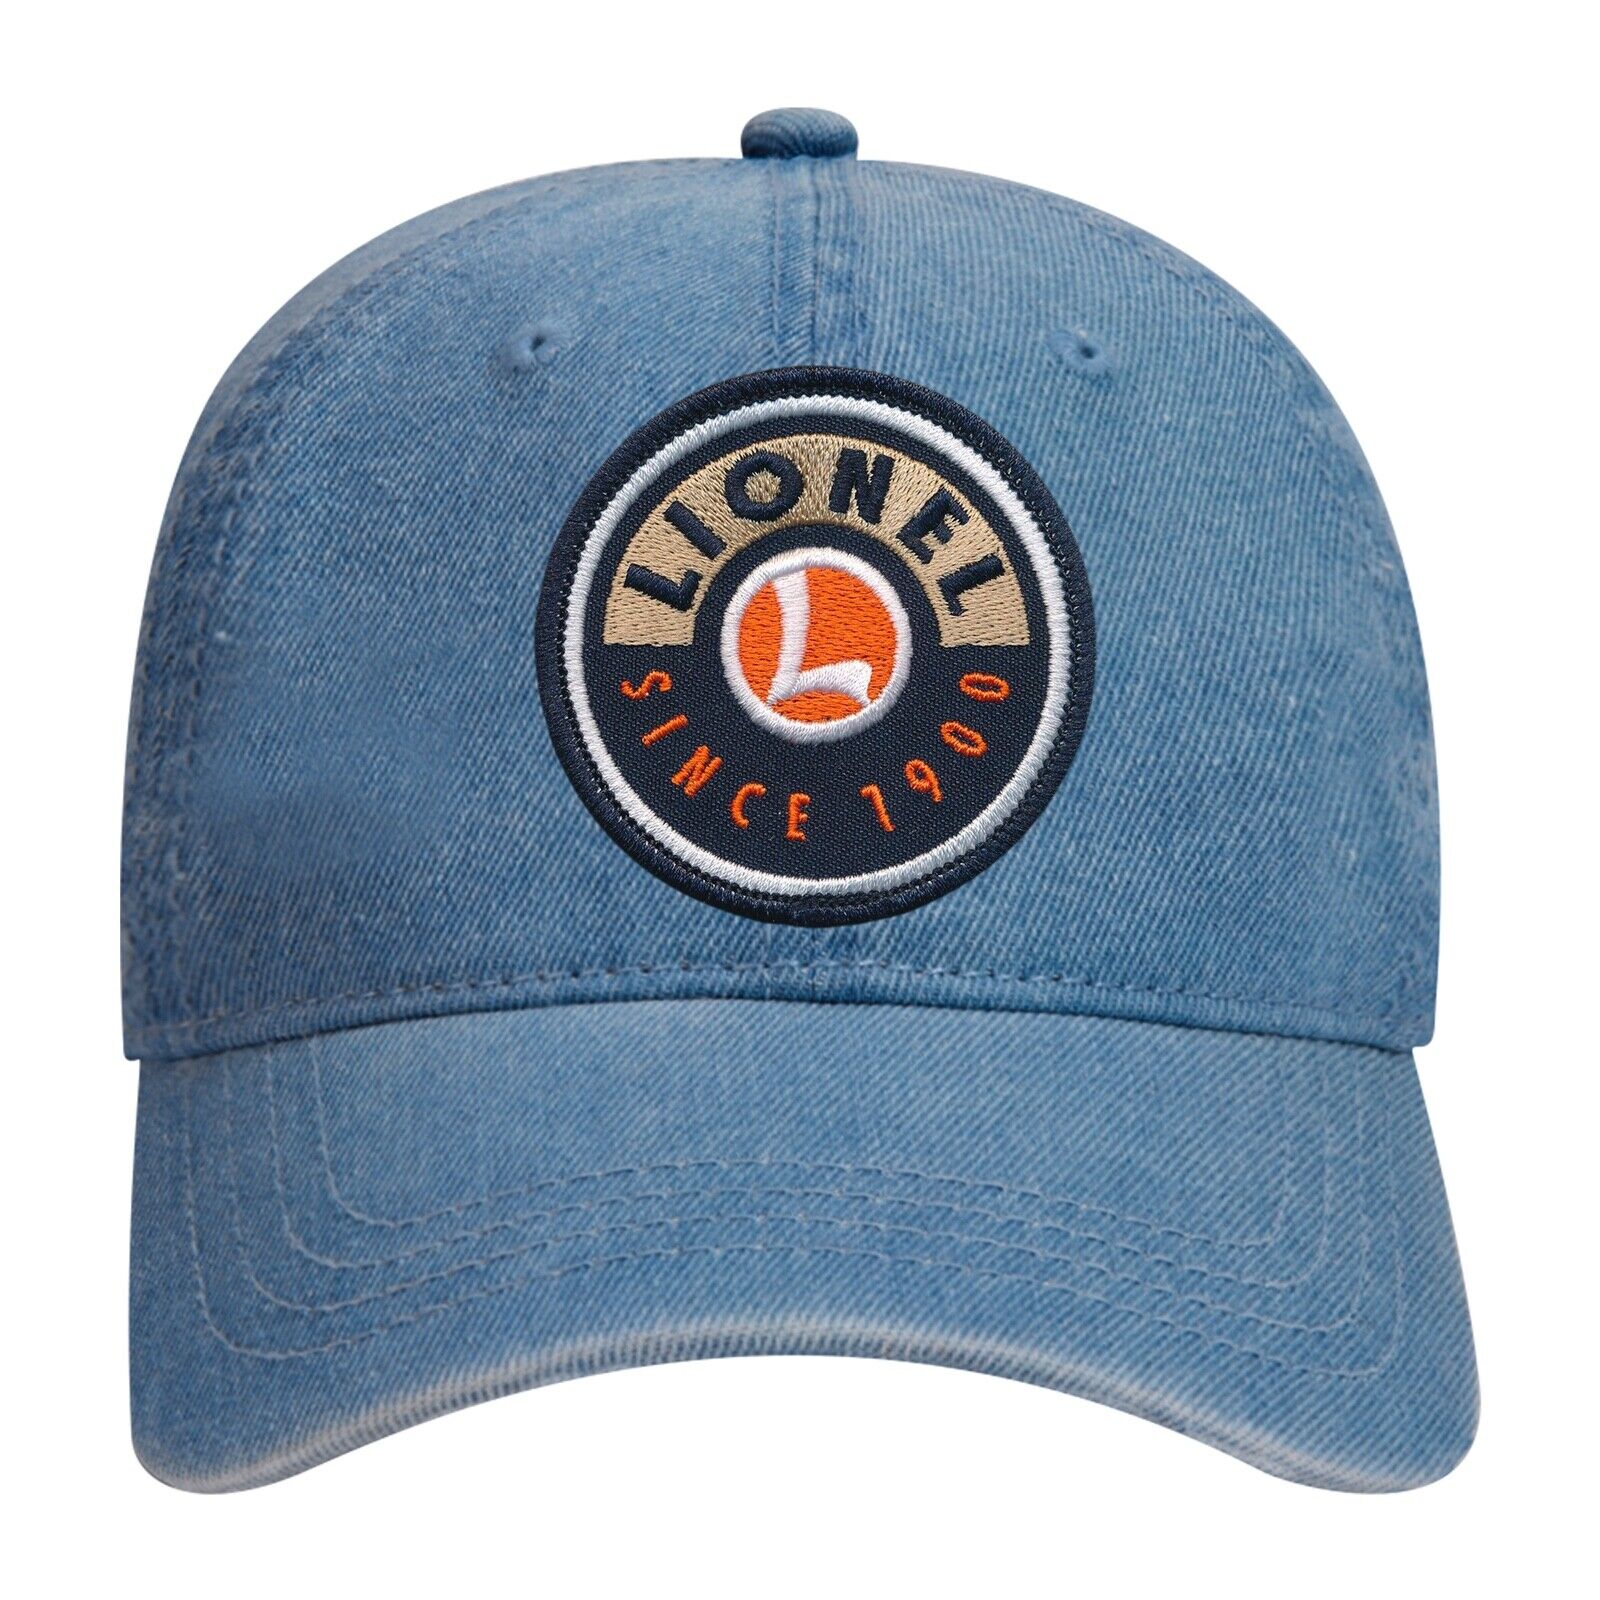 New Casual Look LIONEL TRAINS Collector's Faded Denim Hat 